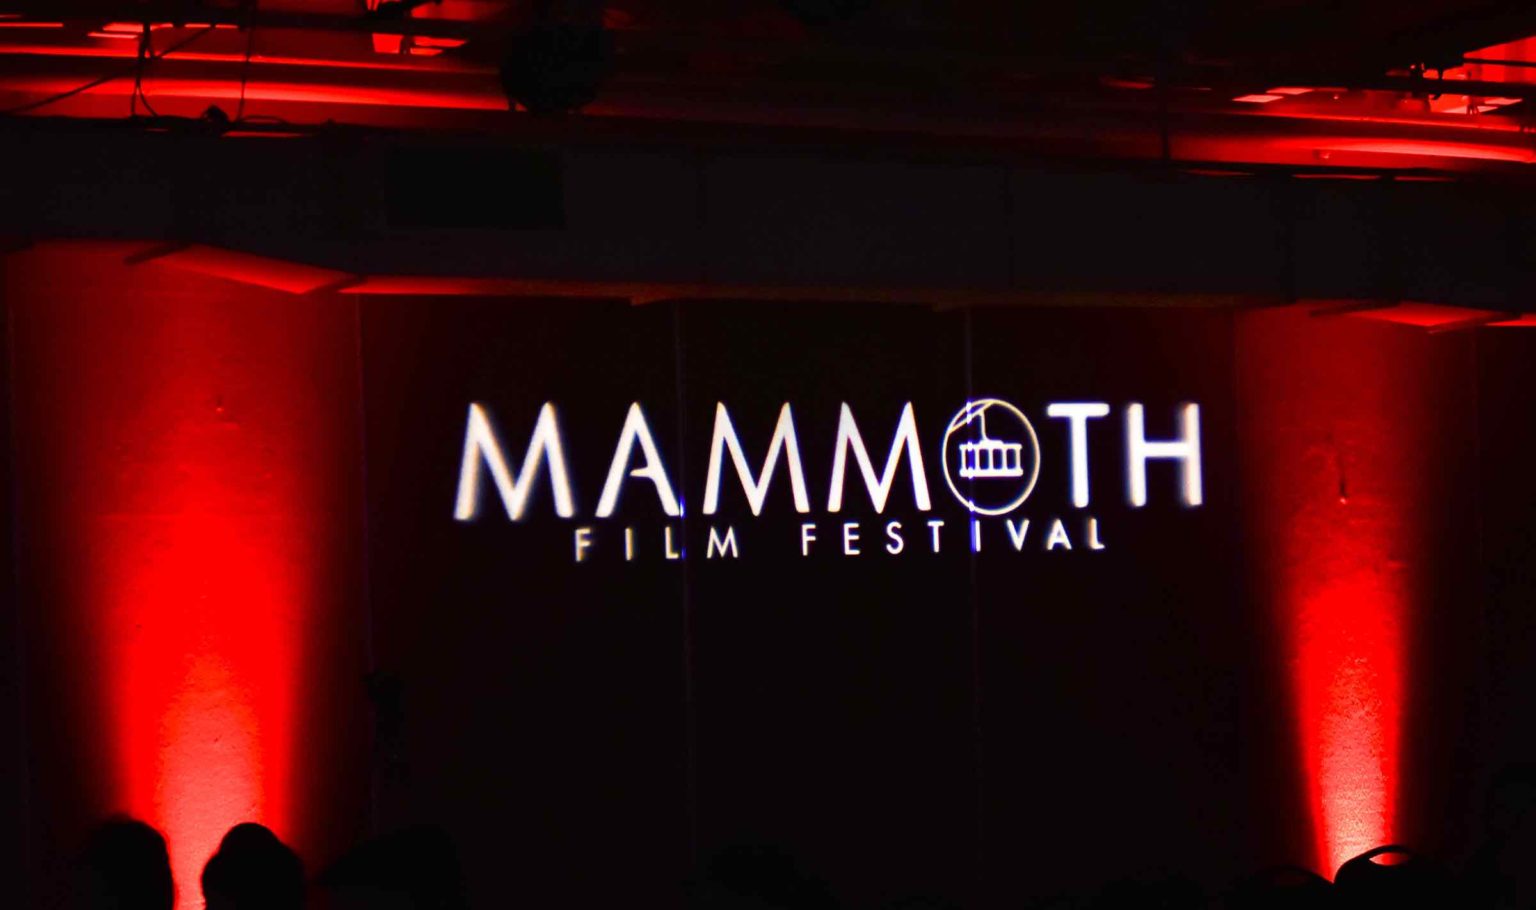 There’s a little bit for everyone to enjoy at the Mammoth Film Festival. Here’s the rundown of what you want to catch downtown at Minaret Cinemas.